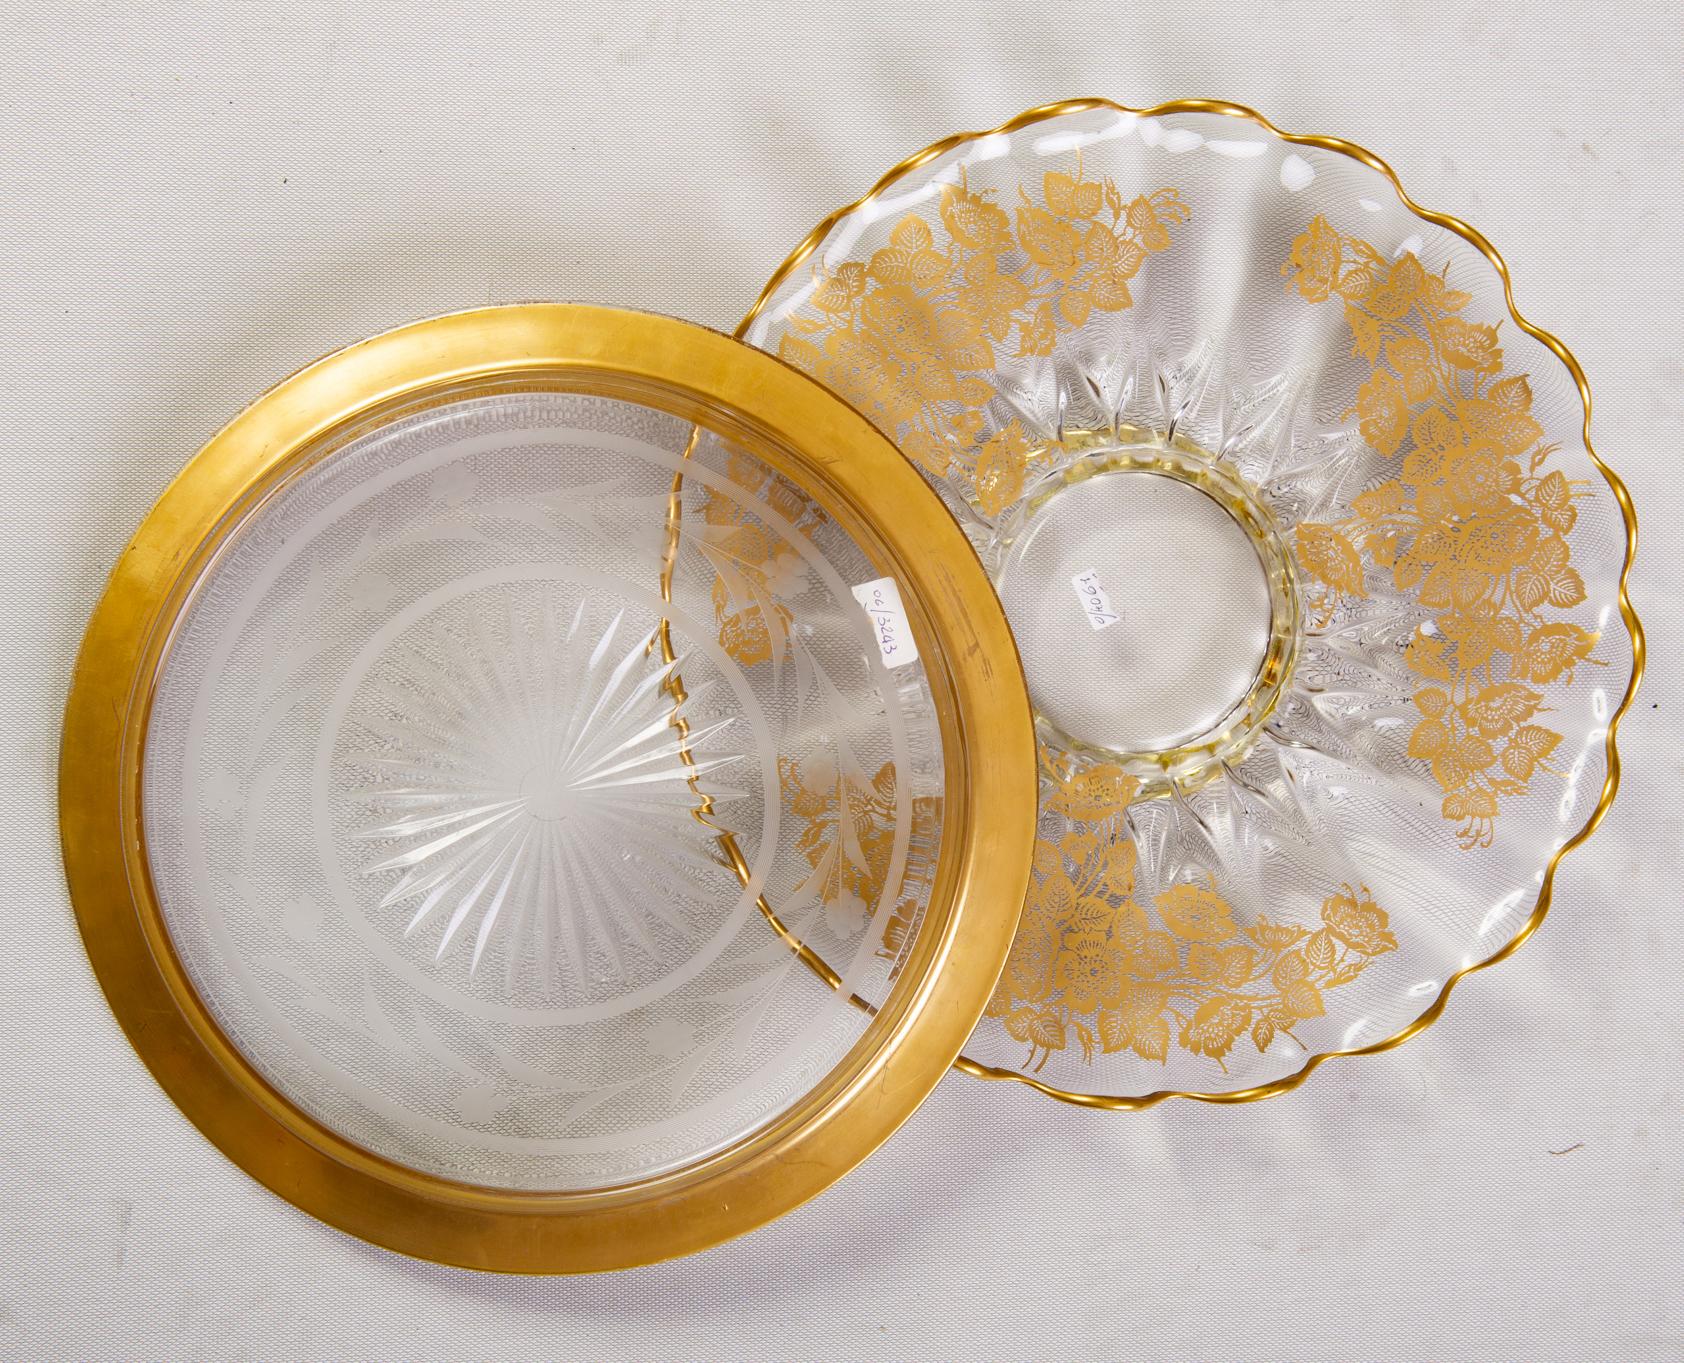 Beautiful vintage gold plated overlay glass centerpiece plates, from 1950th about.
They are lovely items as serverware on Your table.
The interesting price is the same : with flowers or without: I'm closing my activities.

Plate 1, size: 33,3 x